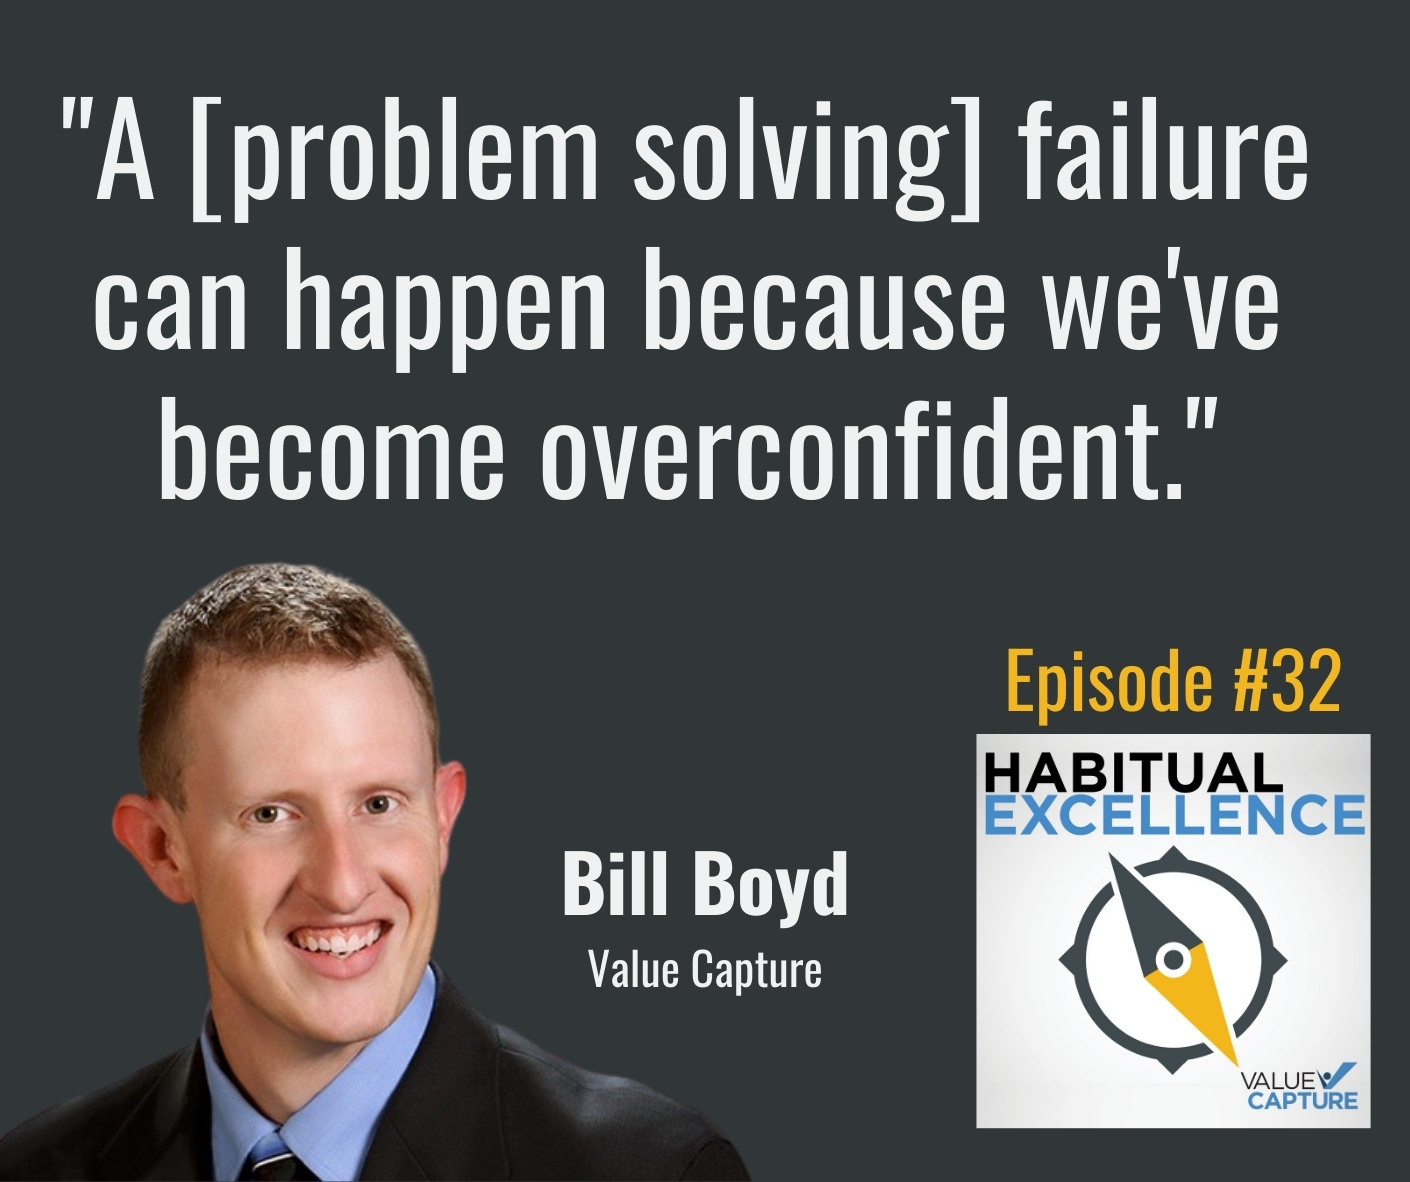 "A [problem solving] failure can happen because we've become overconfident."